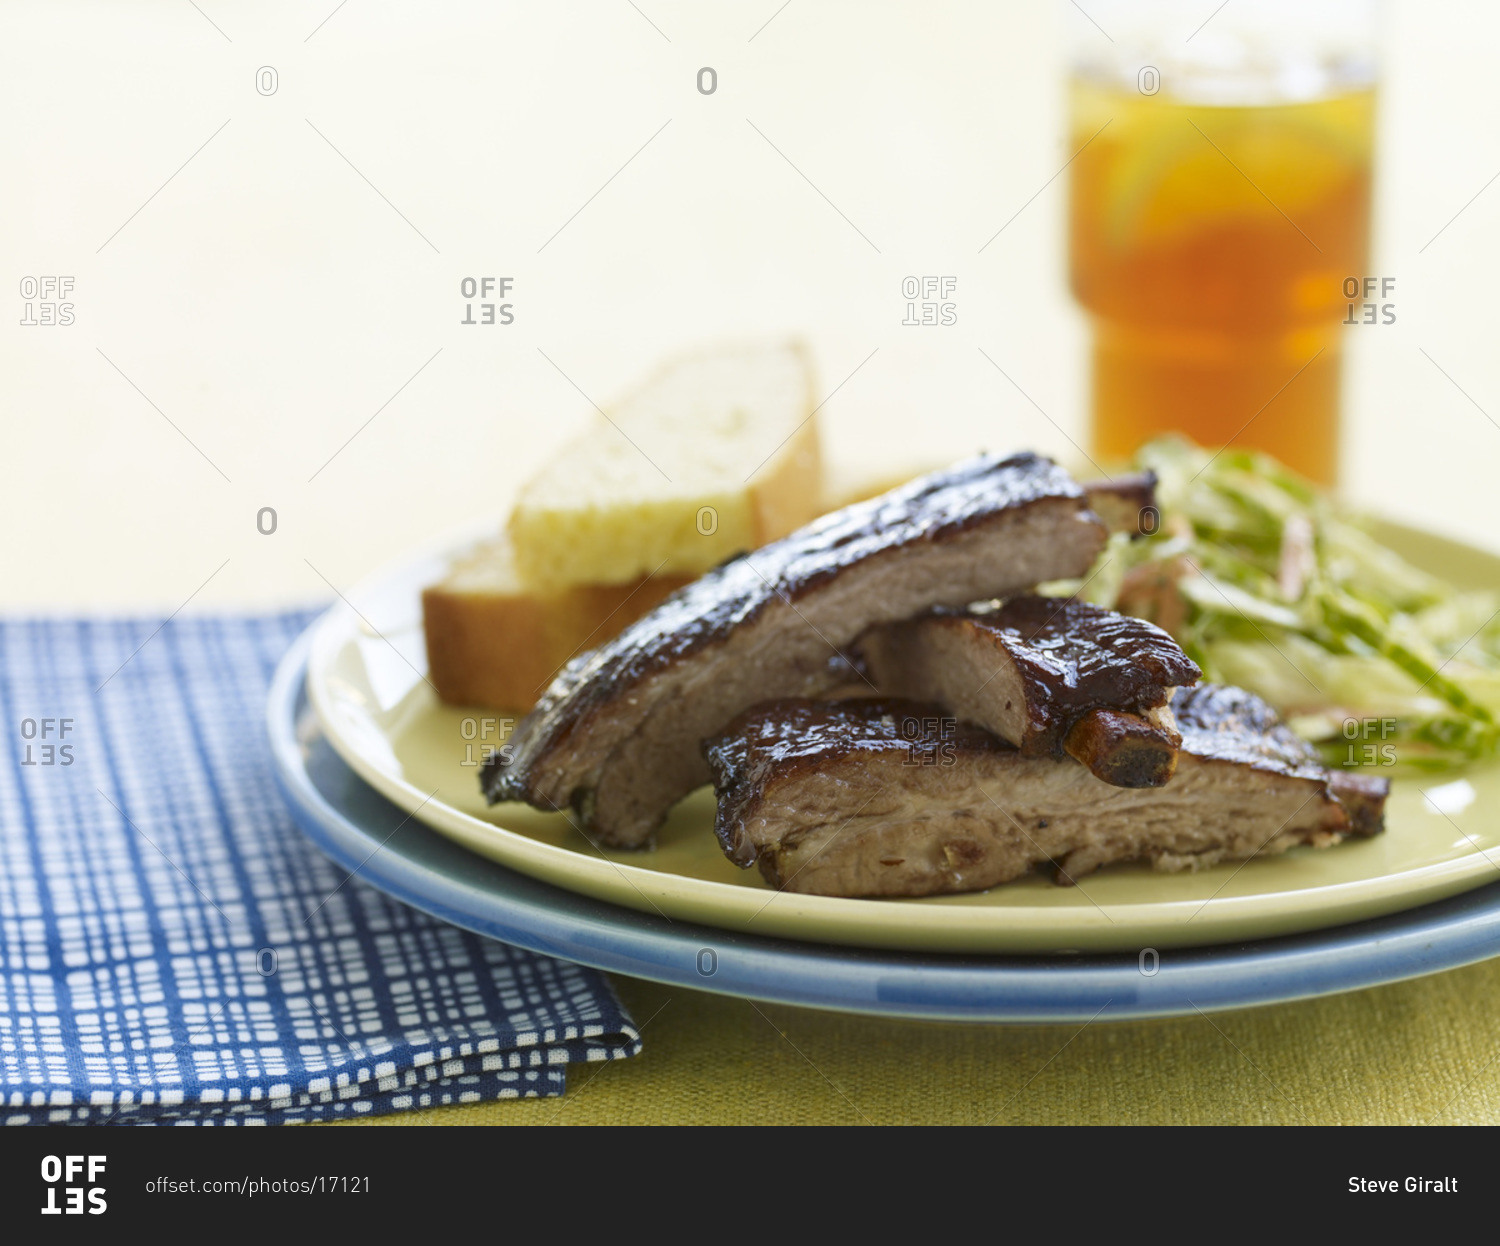 Grilled pork rib chops on plate with a glass of beer.